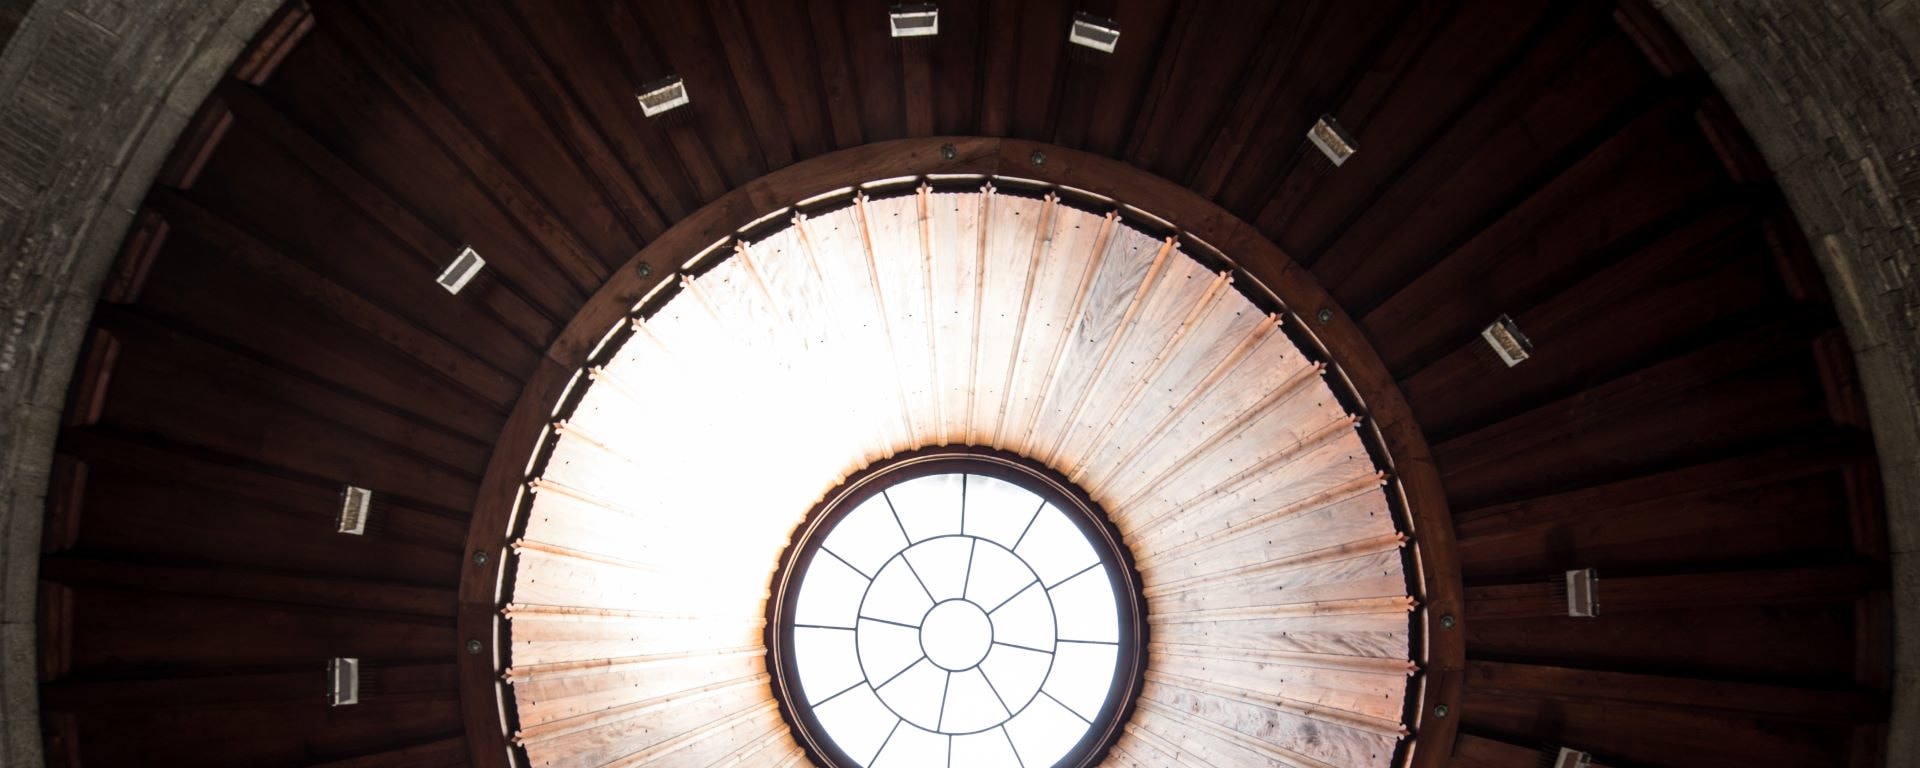 Architectural close-up of circular skylight amidst wooden dome ceiling with geometric patterned design